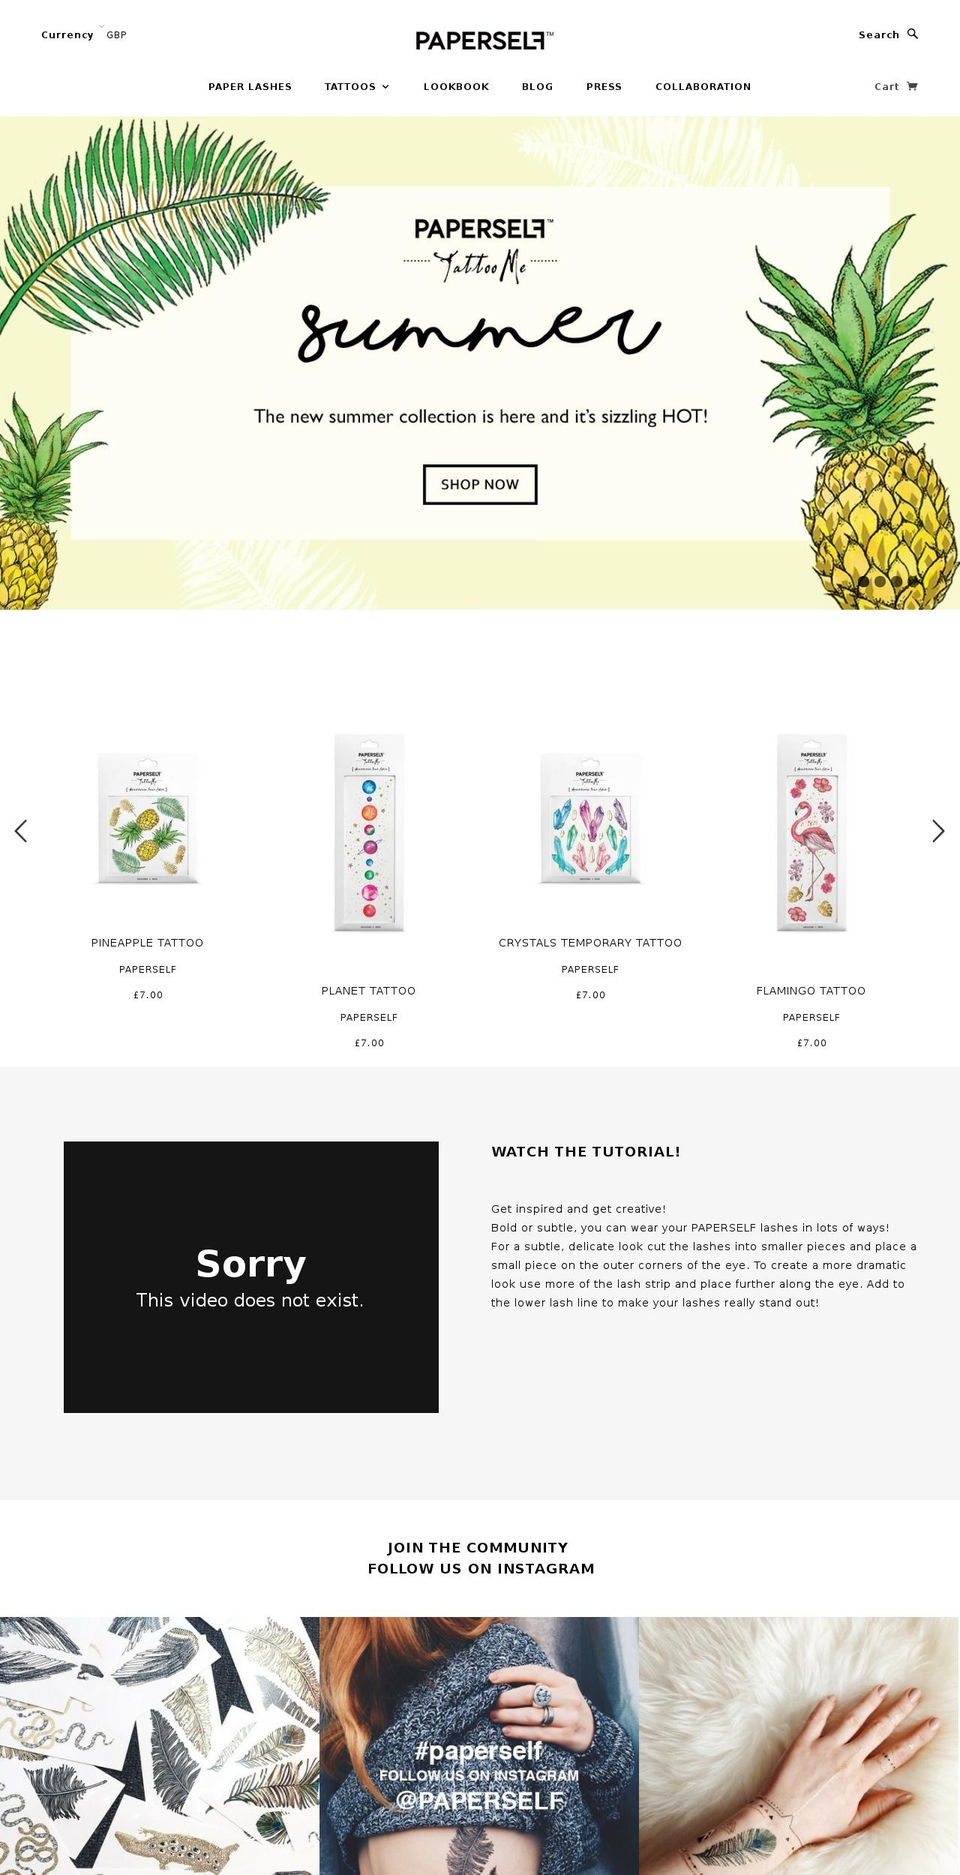 Blockshop Shopify theme site example paperself.com